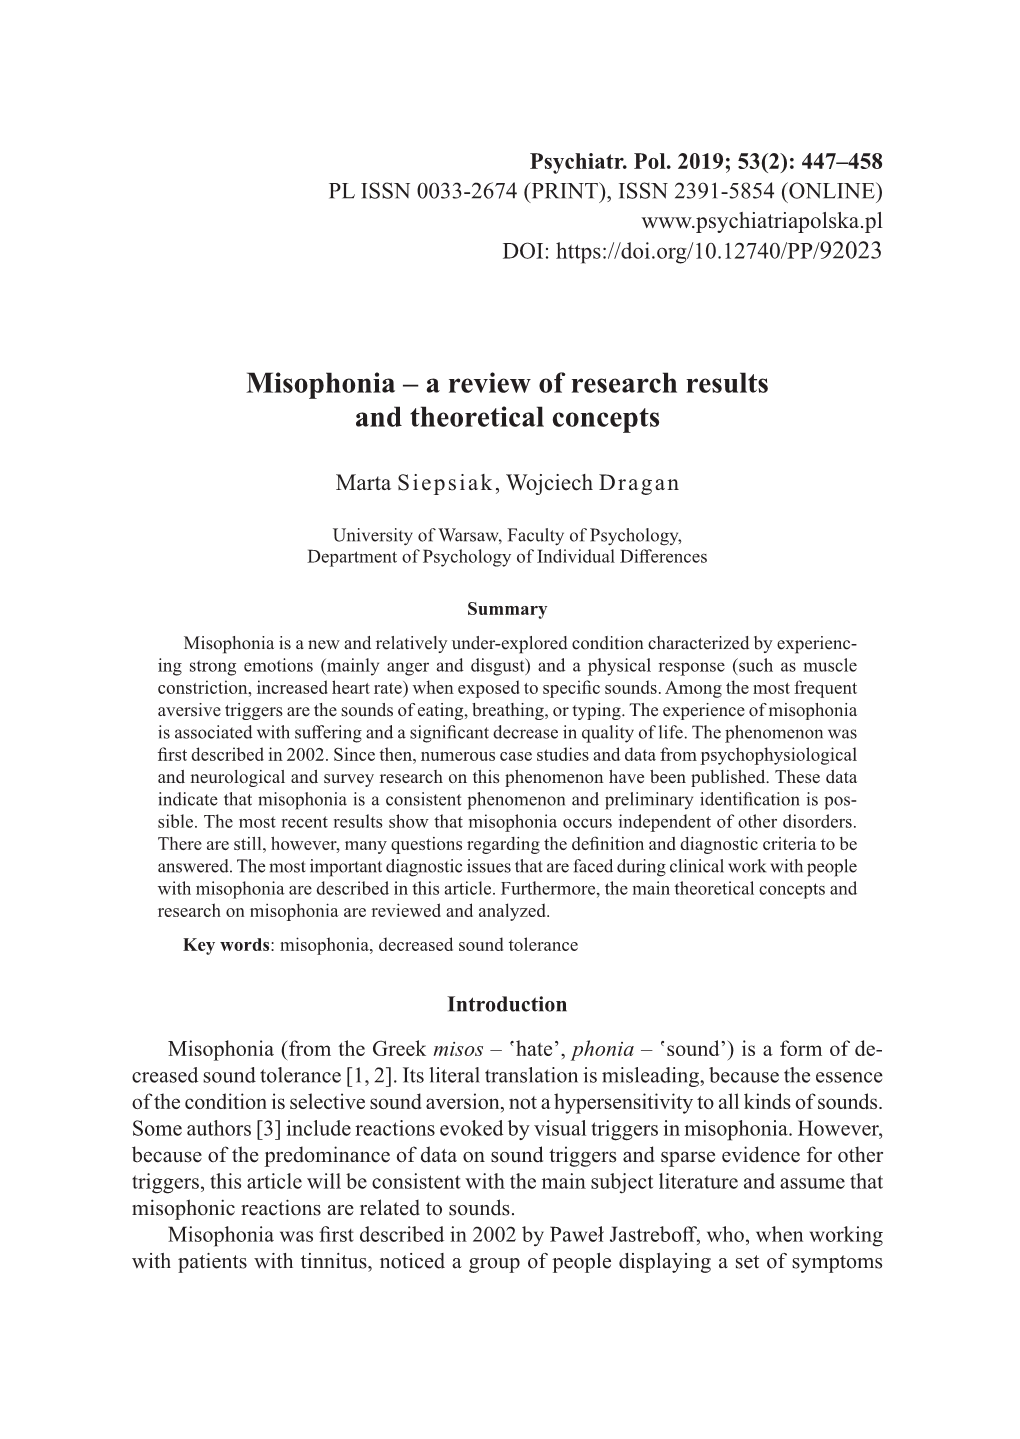 Misophonia – a Review of Research Results and Theoretical Concepts